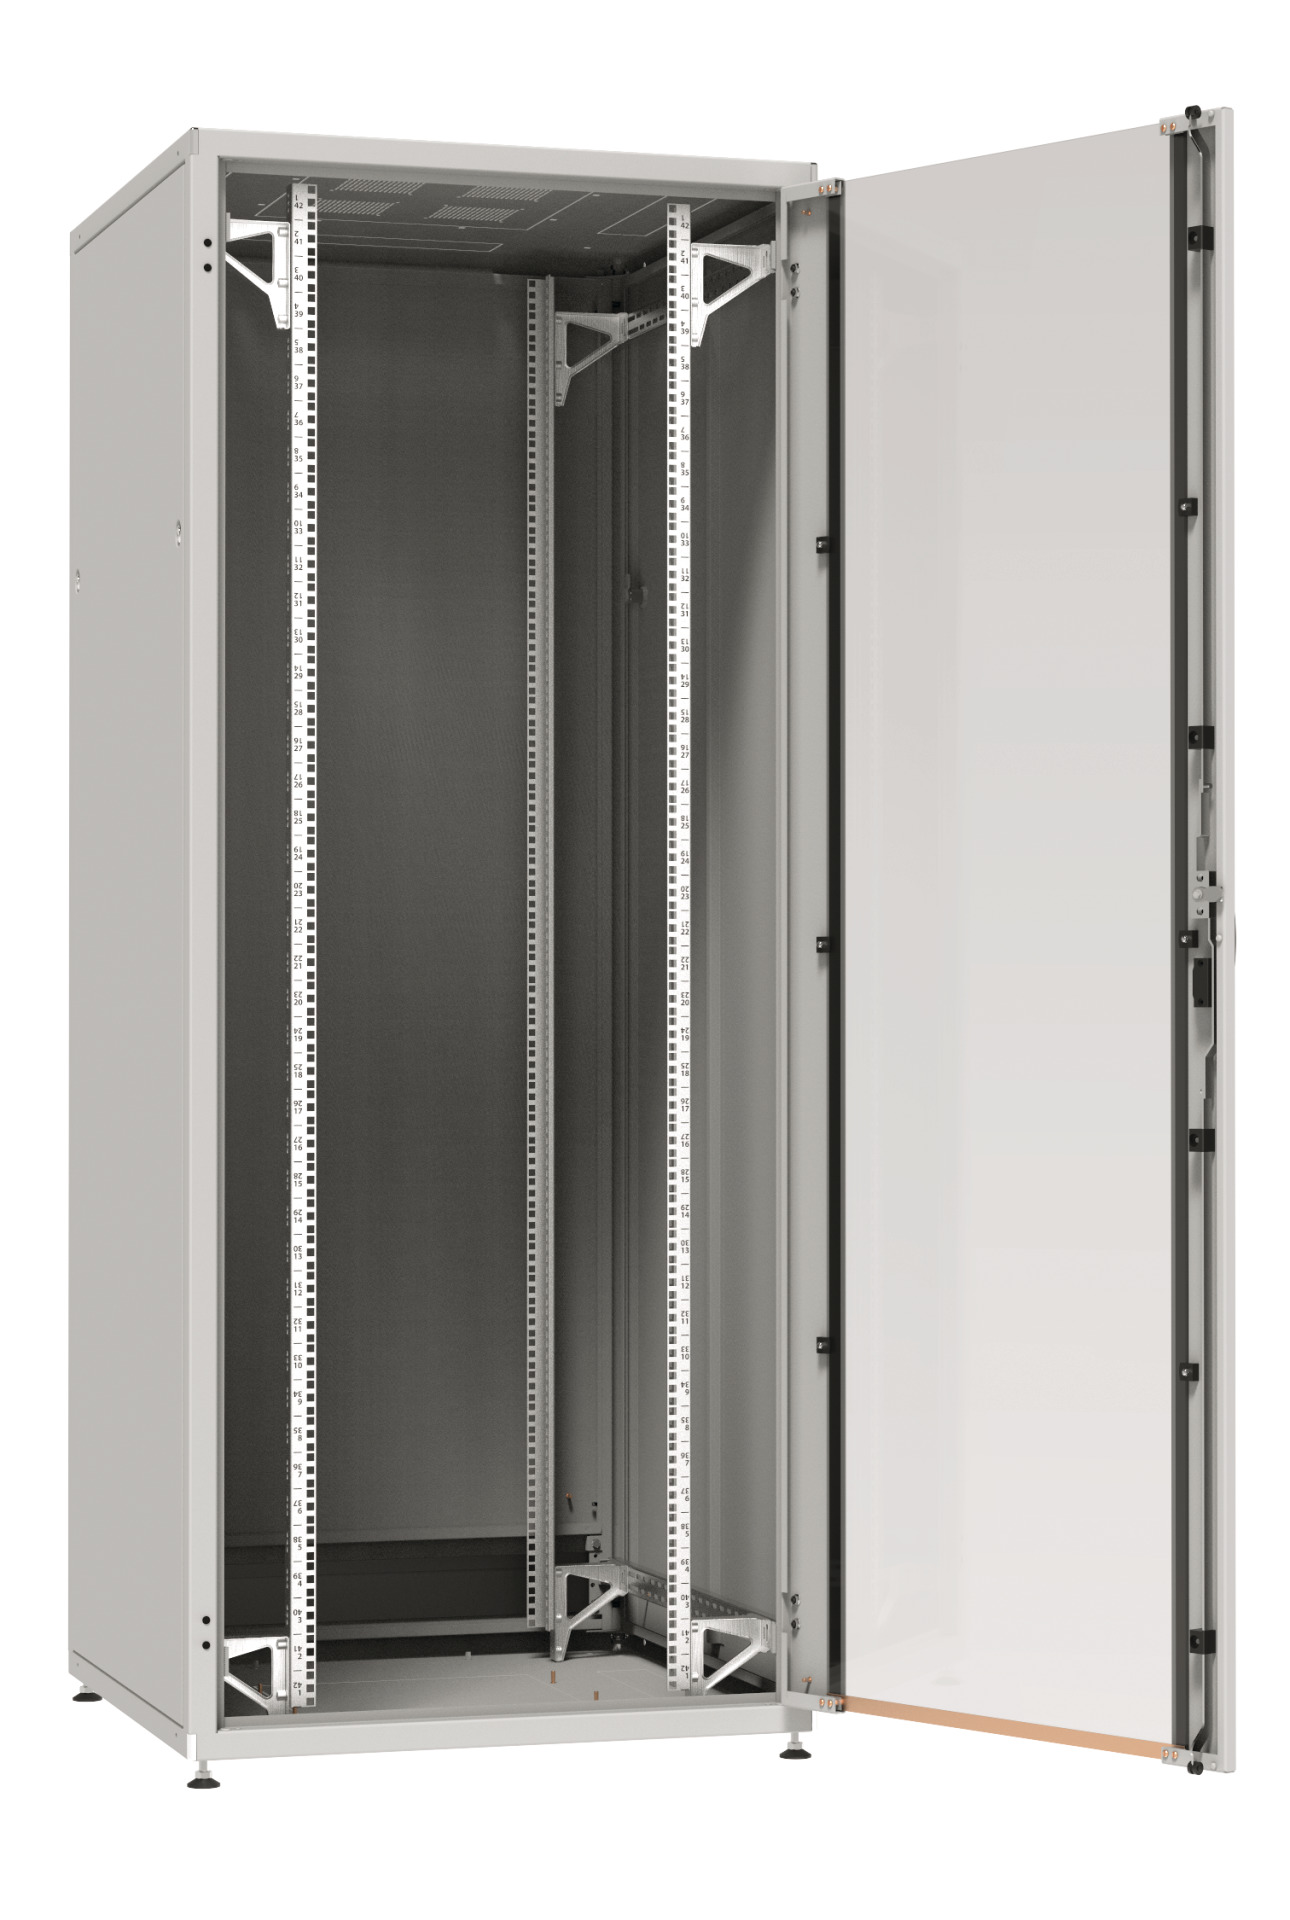 19" Network Cabinet PRO 24U, 800x800 mm, RAL7035, Rear Door with Turning Handle